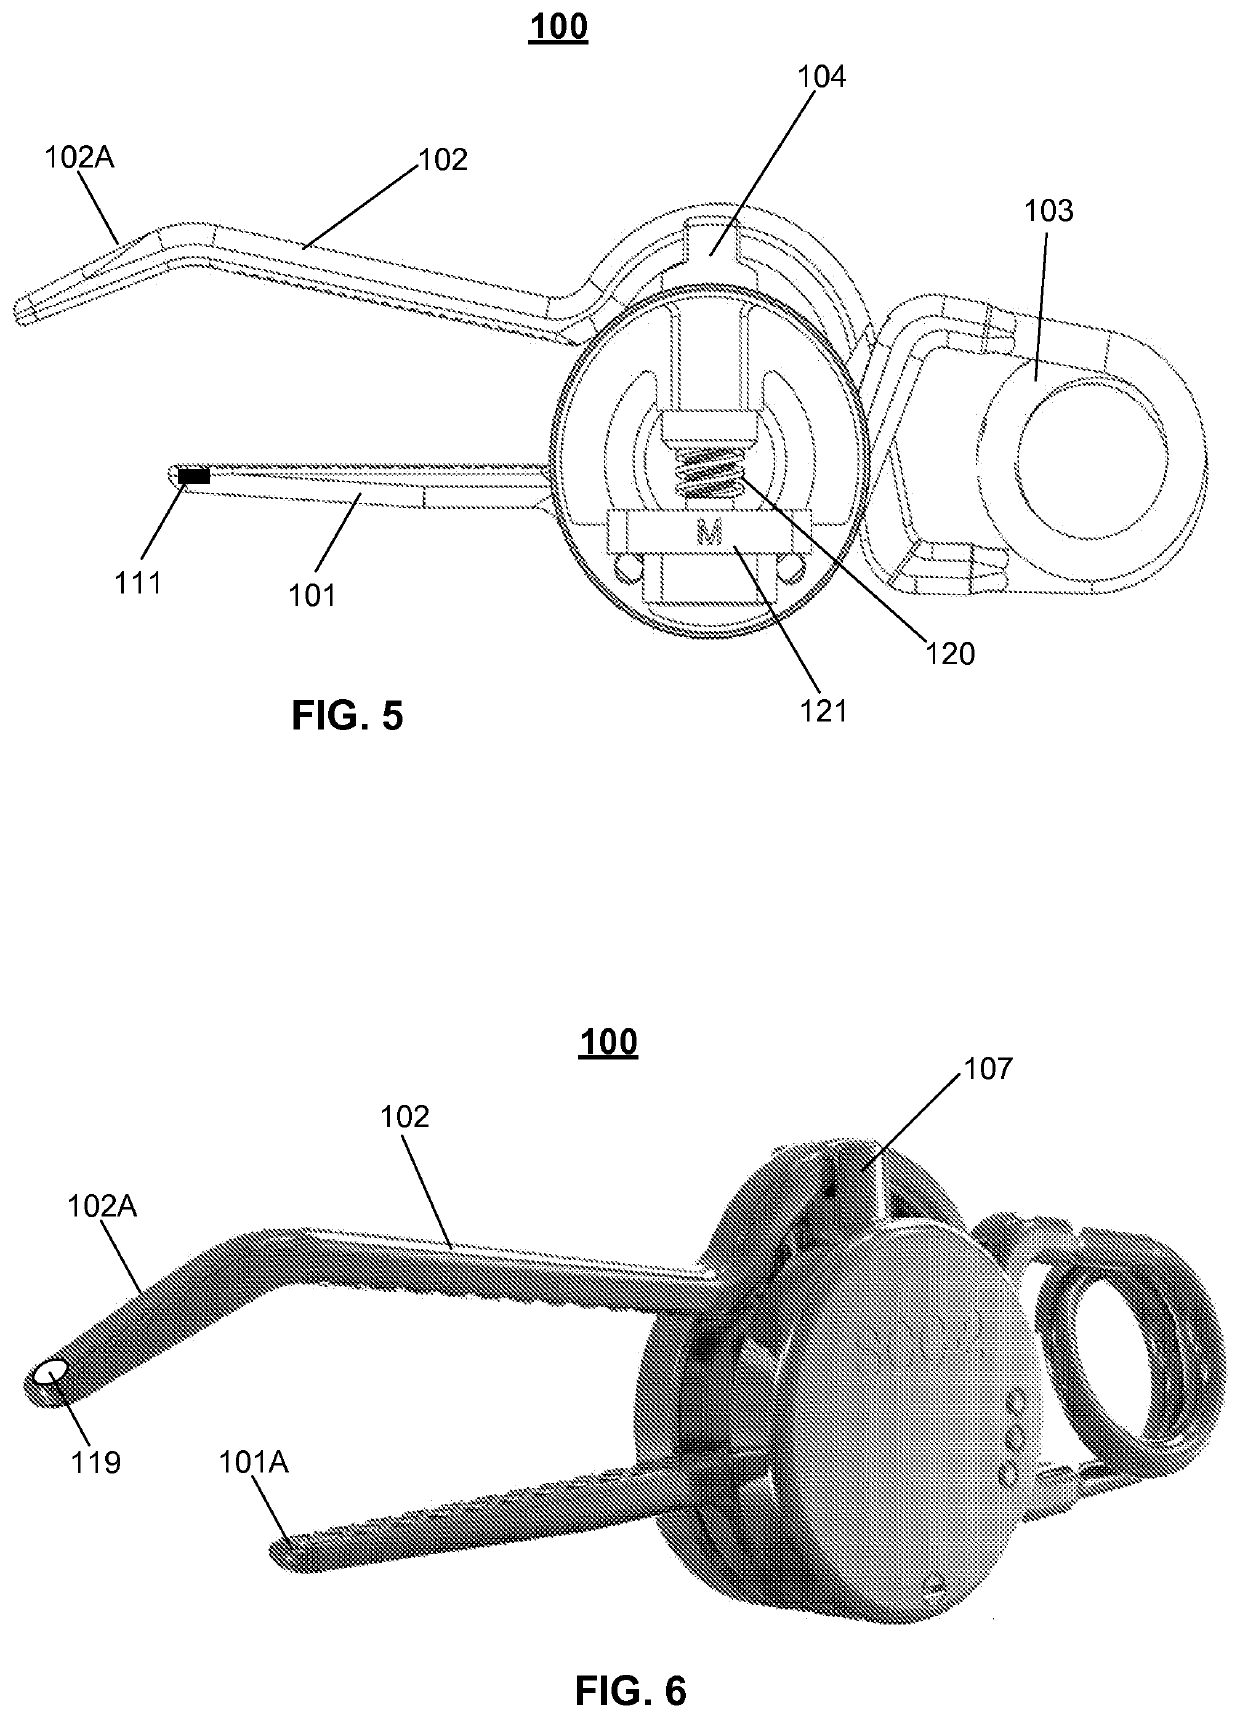 A device for applying external pressure on a surface of an anatomical object